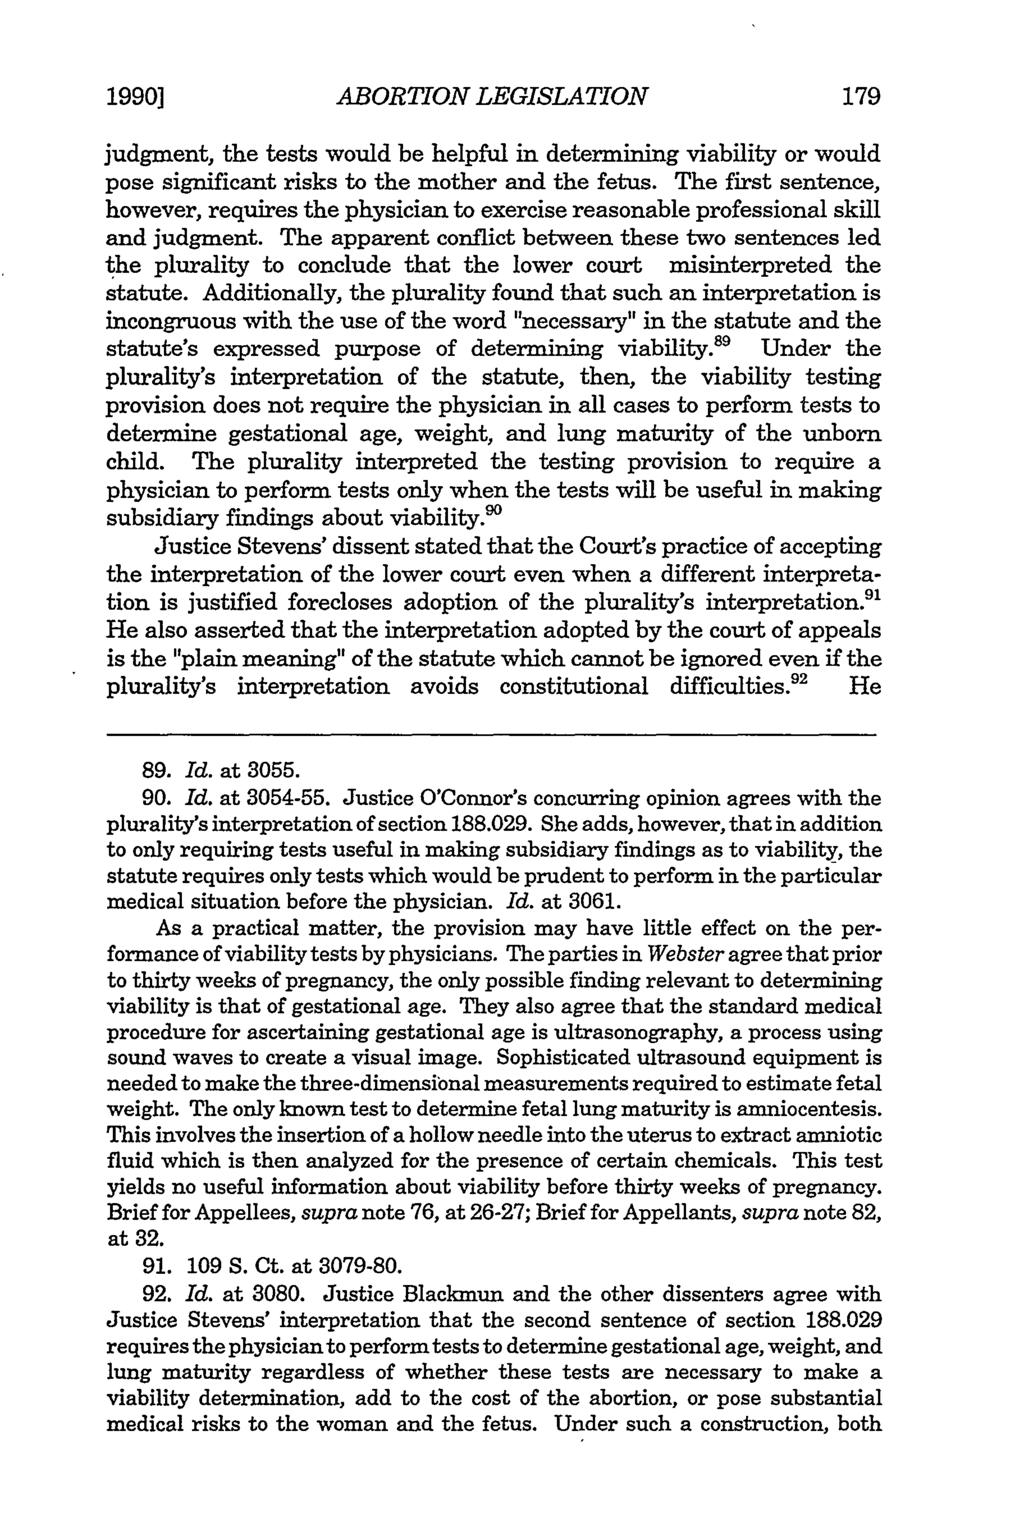 1990] Eggert et al.: Eggert: Of Winks and Nods ABORTION LEGISLATION judgment, the tests would be helpful in determining viability or would pose significant risks to the mother and the fetus.